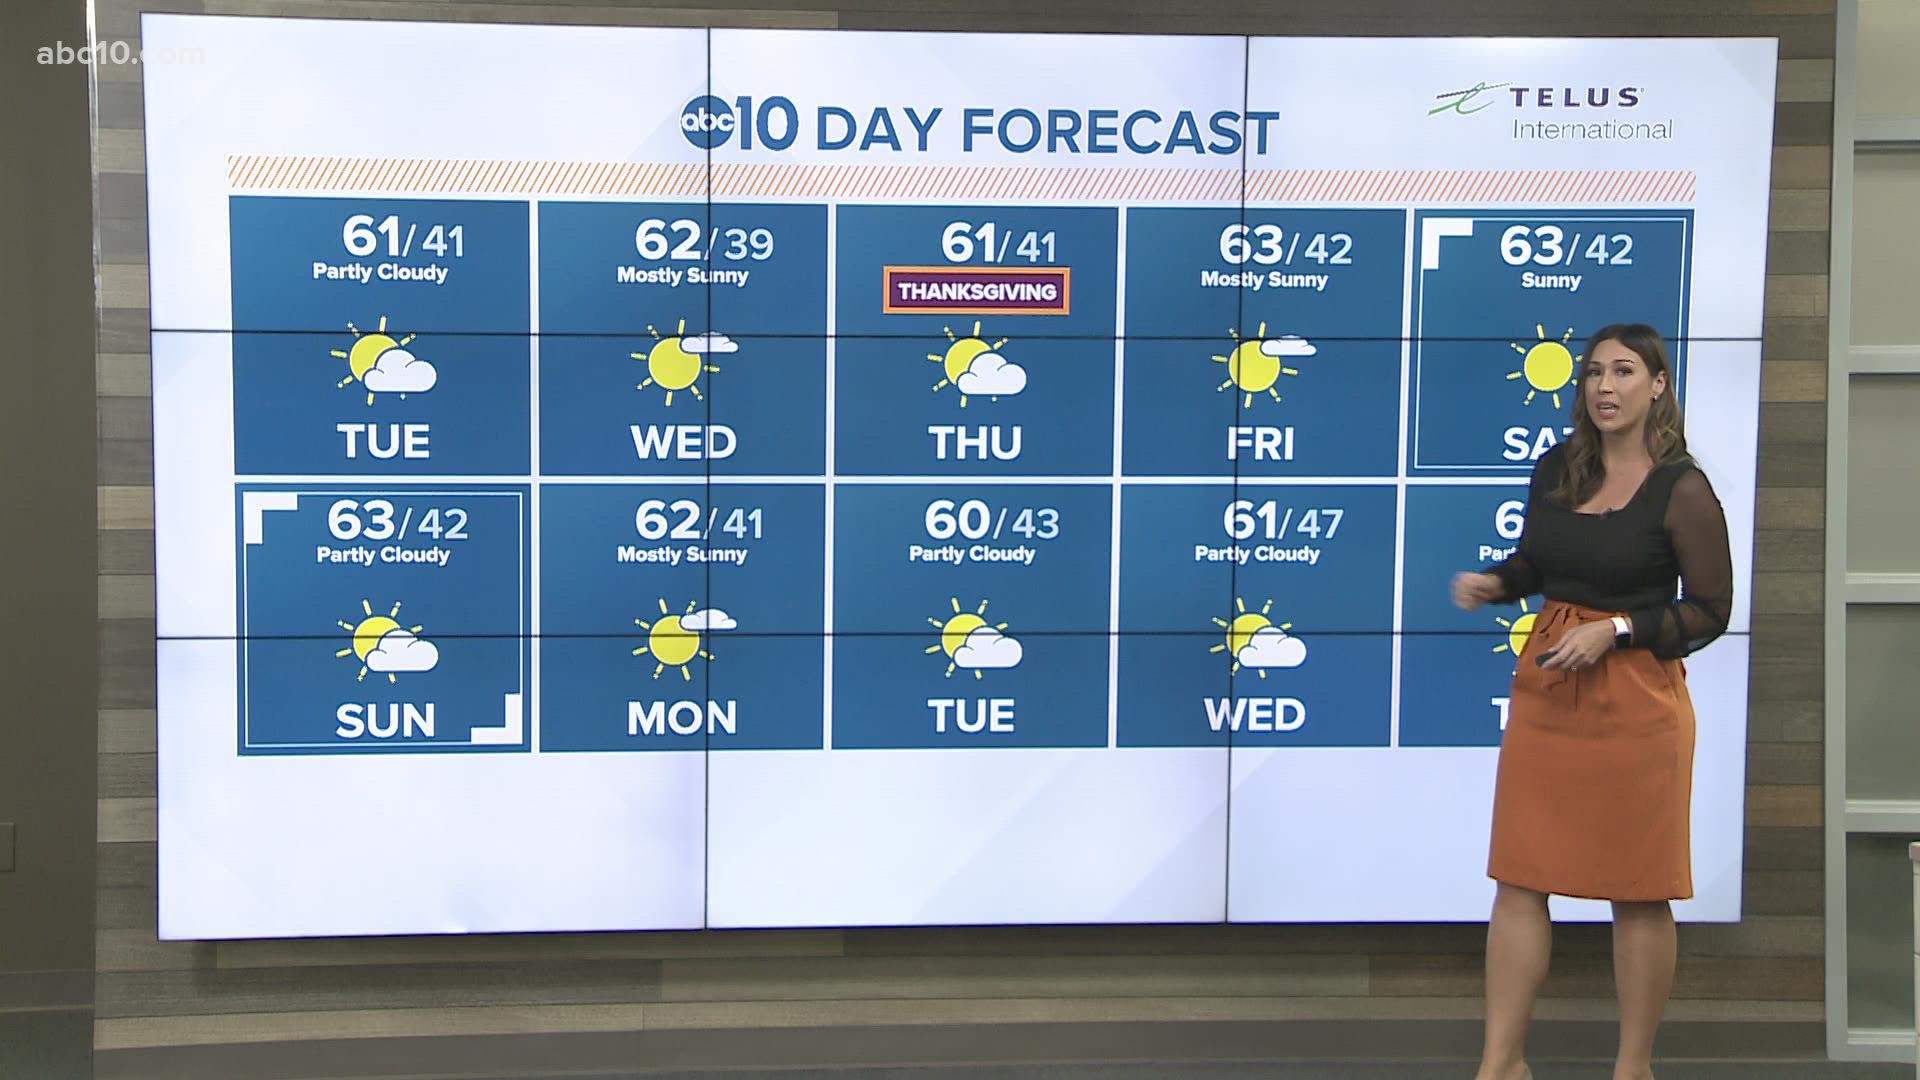 Carley Gomez explains what the next 10 days of weather will look like.